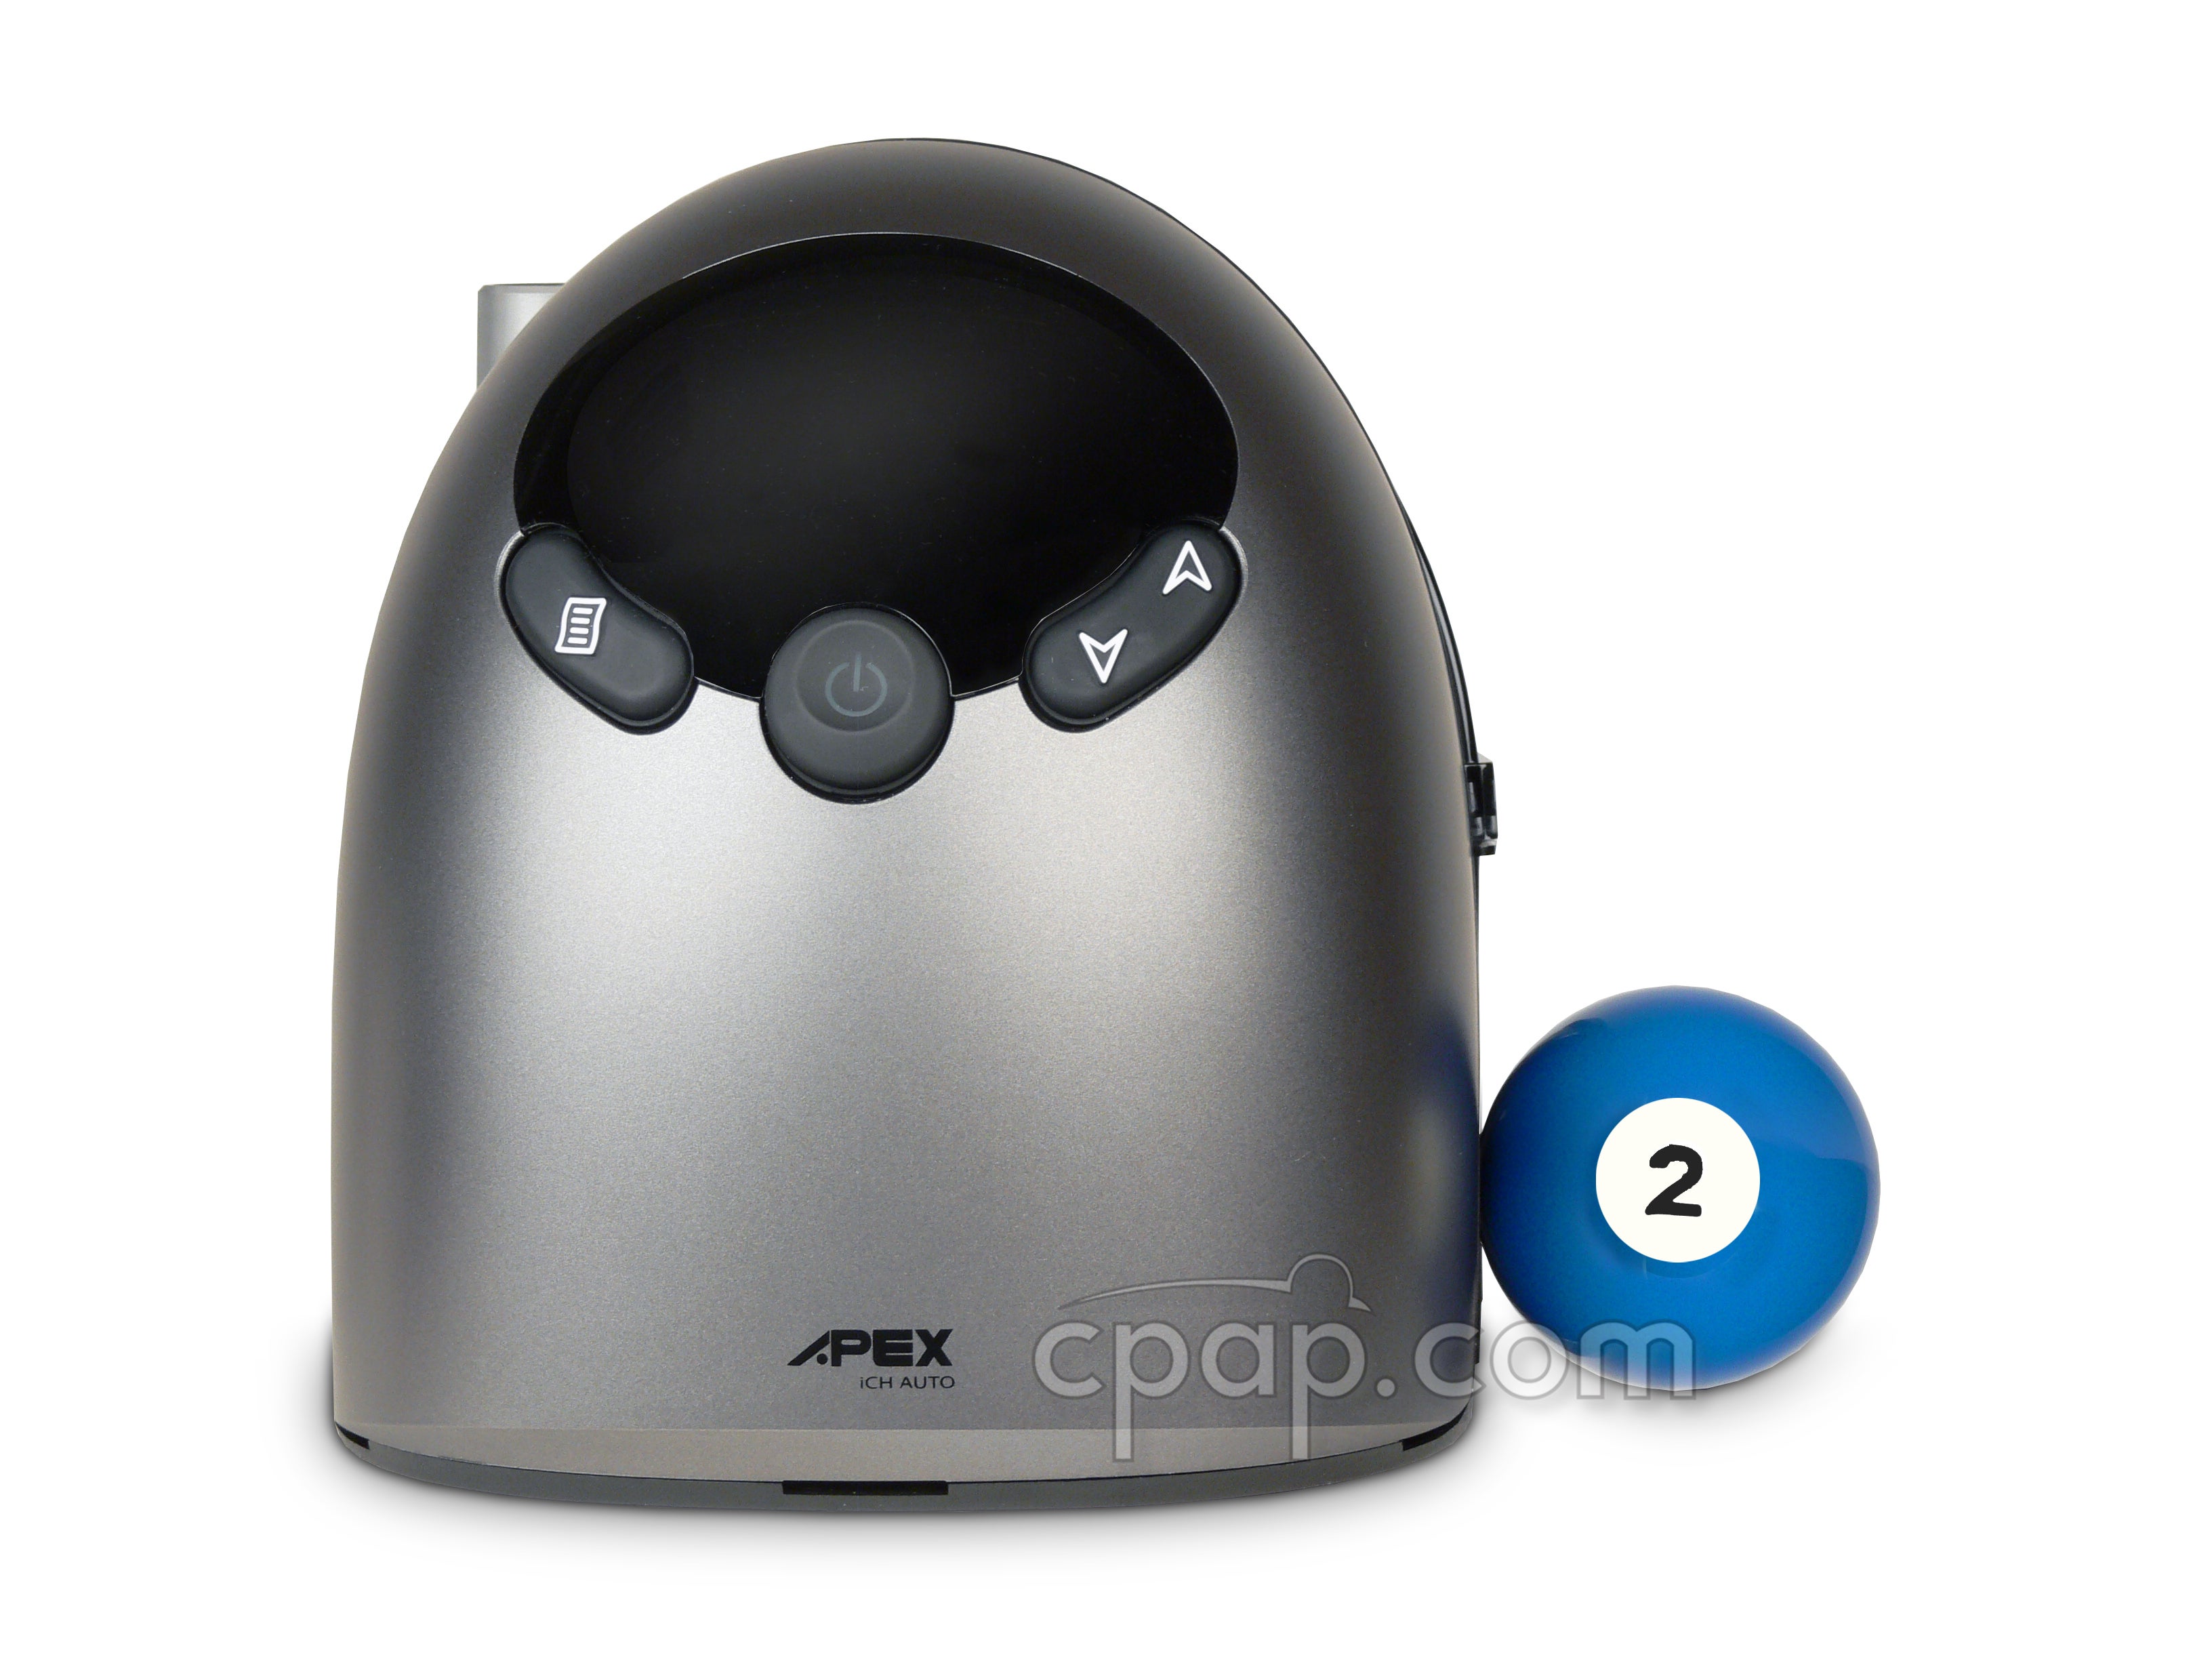 iCH Auto CPAP with Built In Humidifier - Front (shown with billard ball - not included)